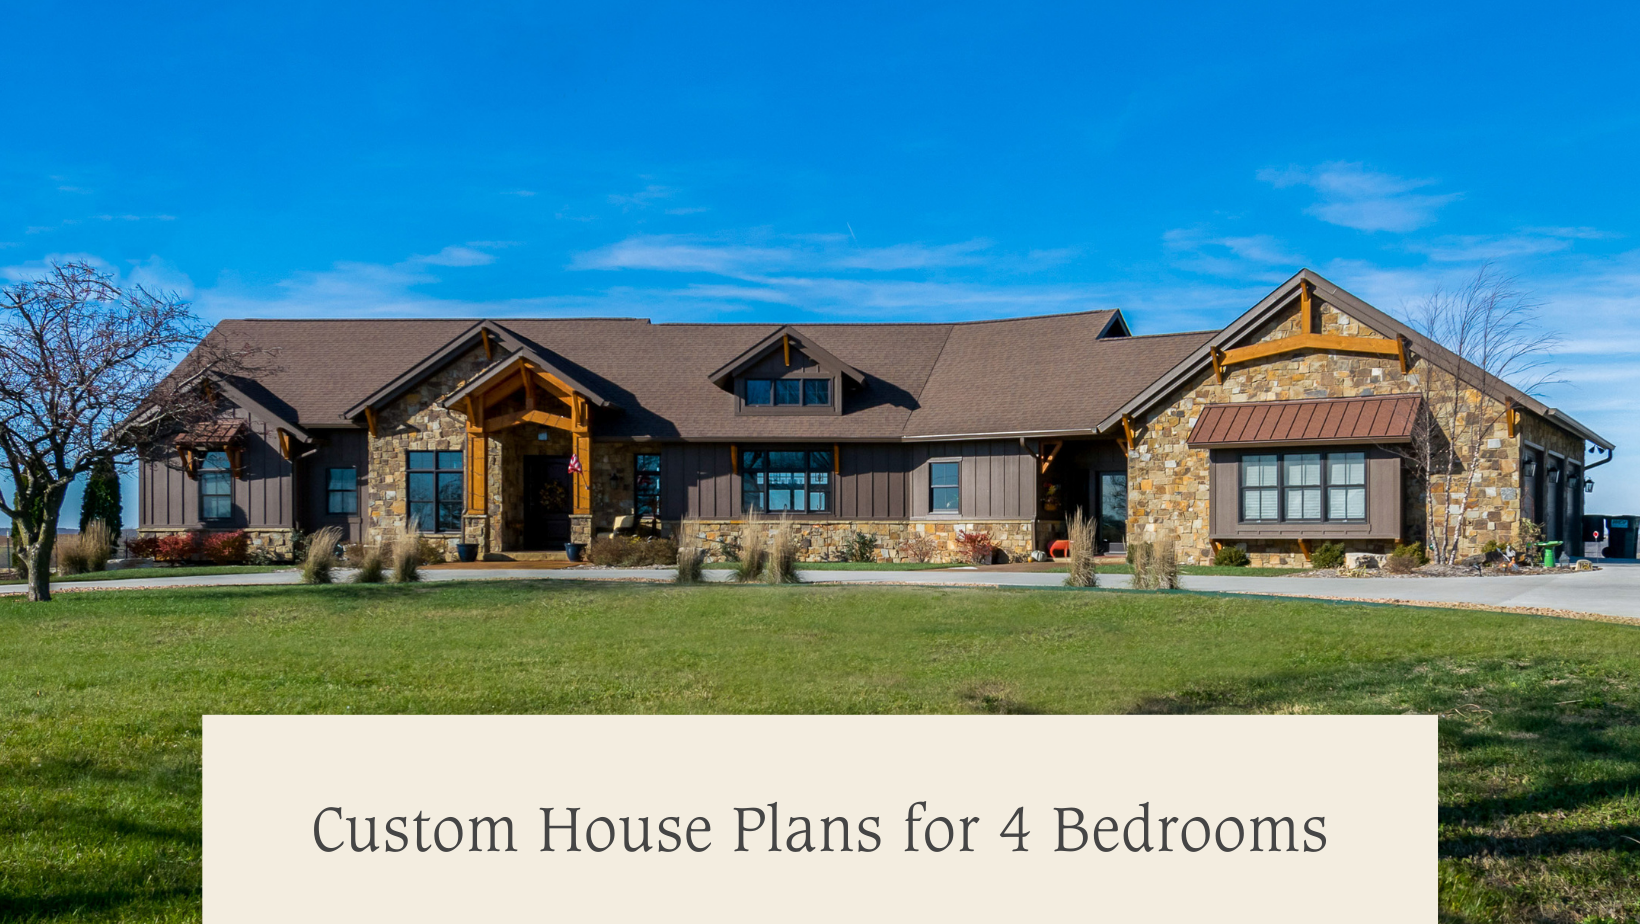 Custom House Plans for 4 Bedrooms